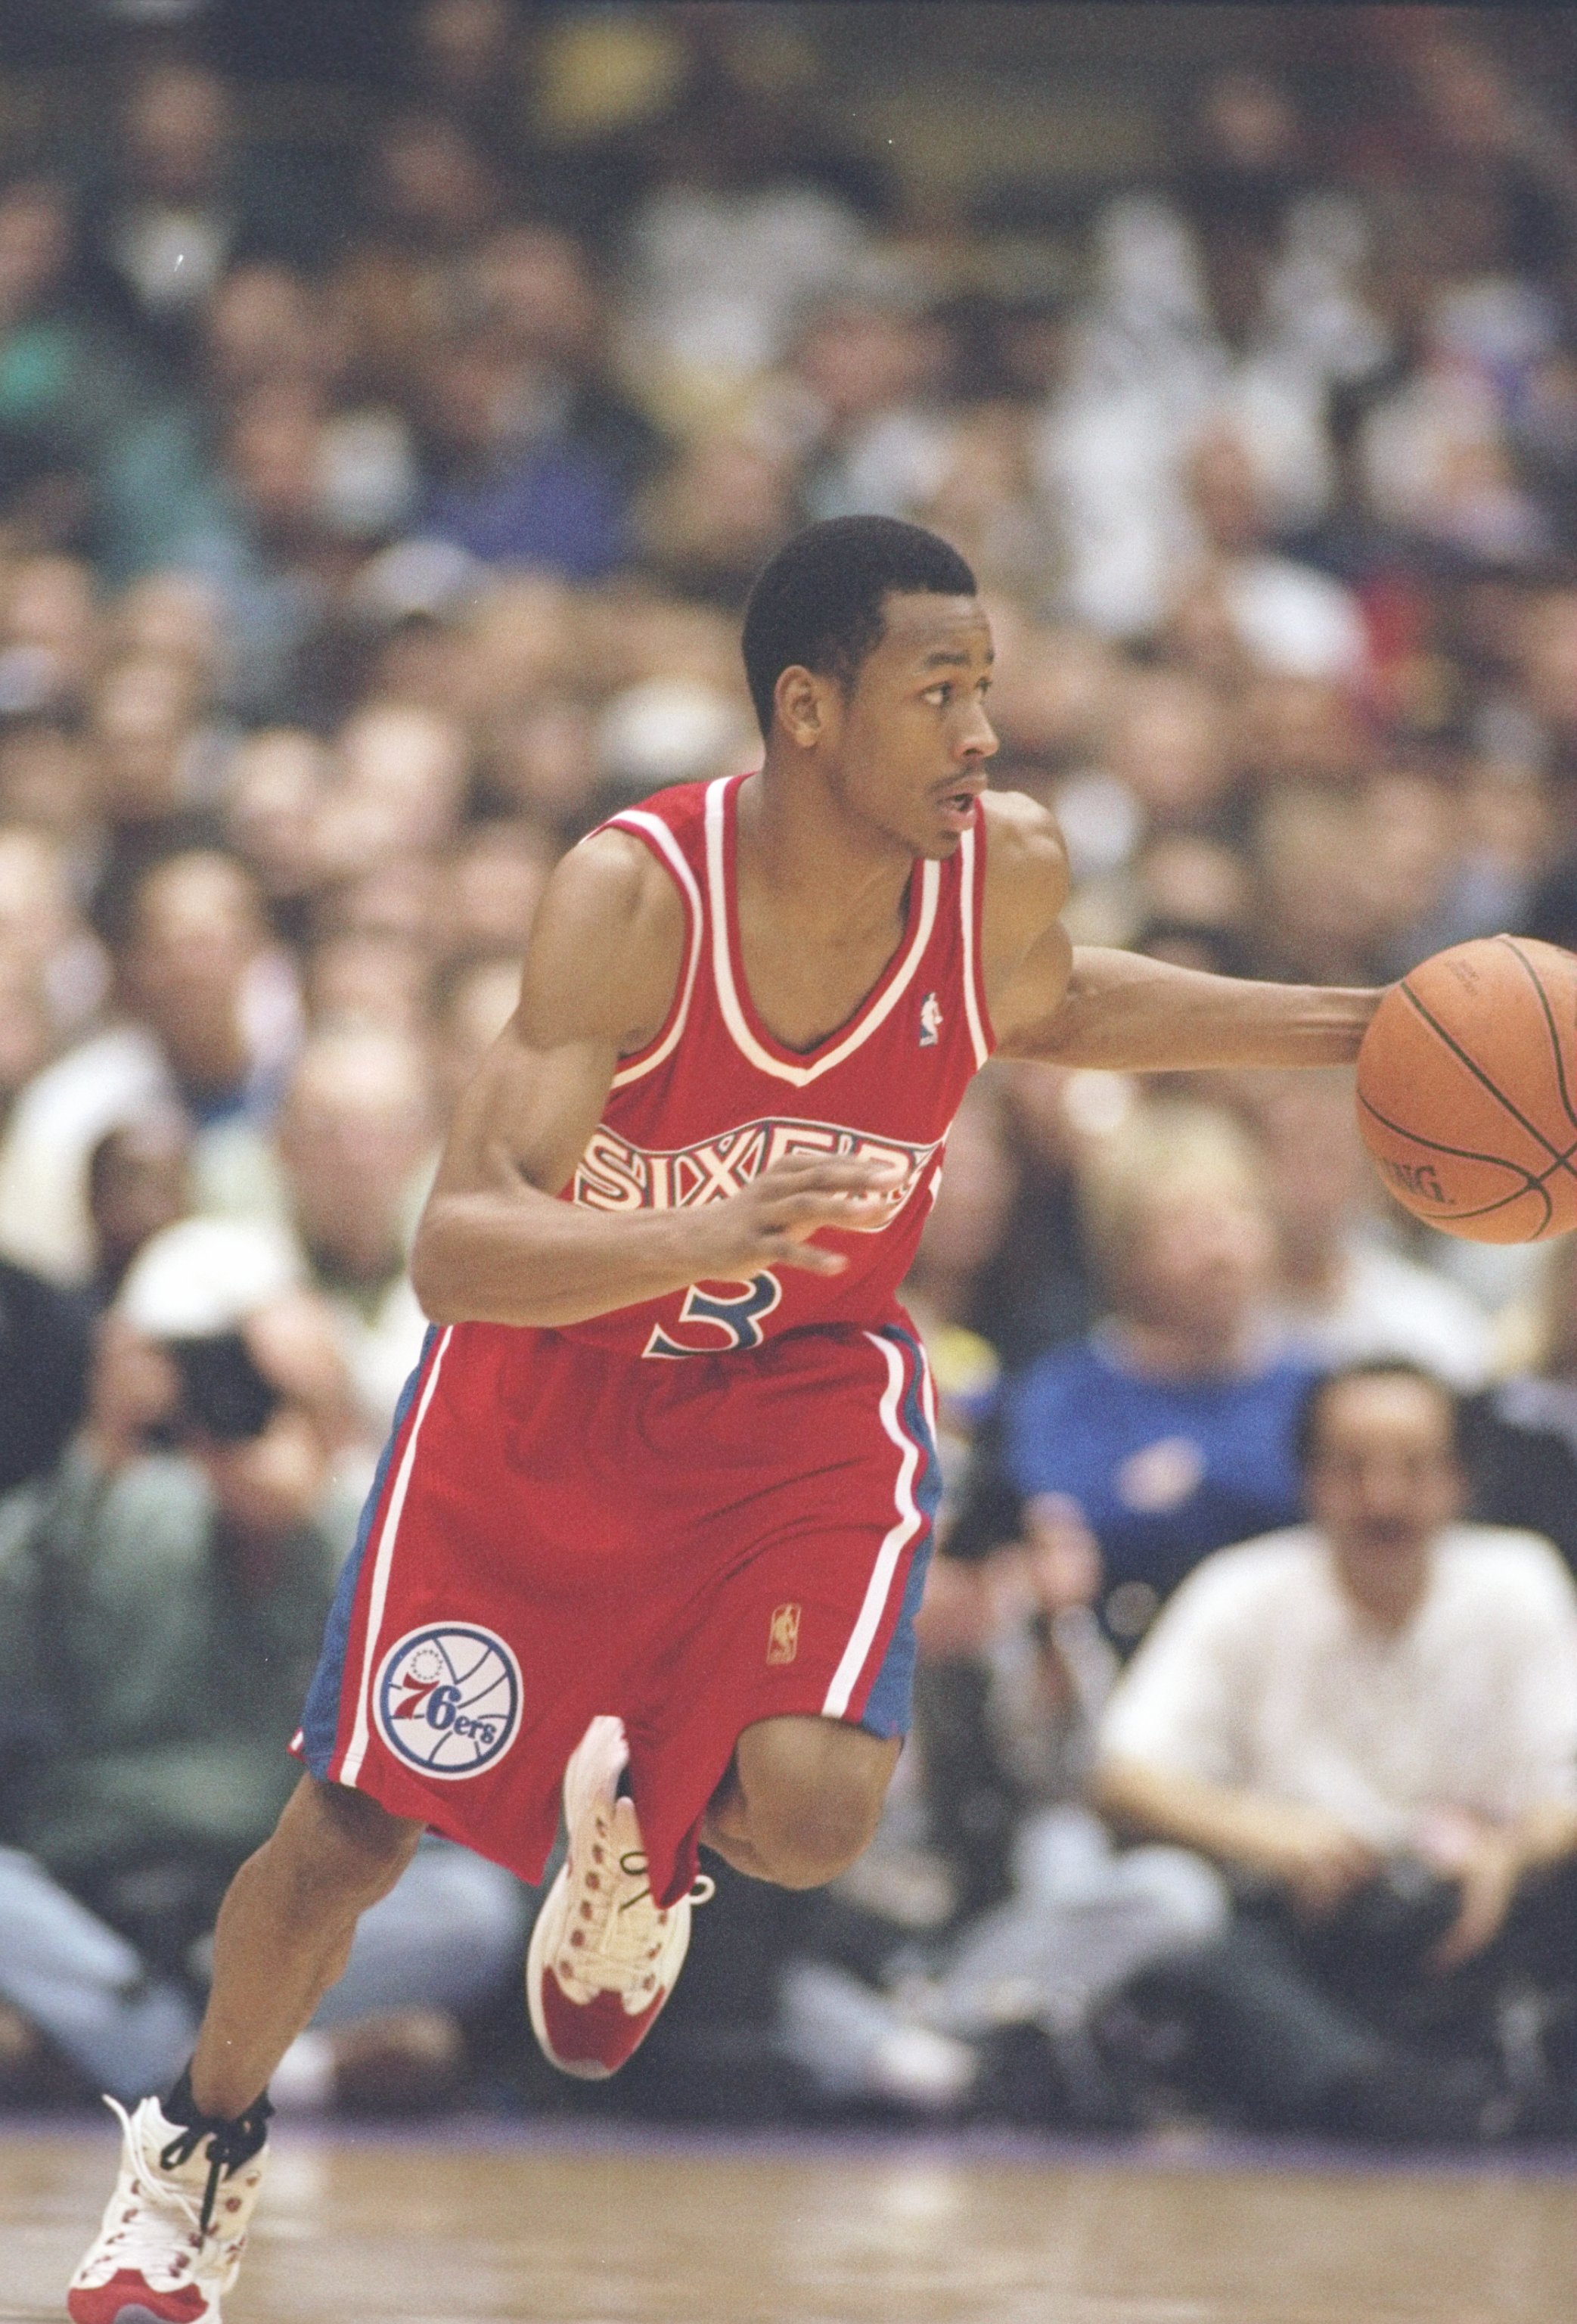 This is a photo of Allen Iverson in his 1996 season with the Sixers.